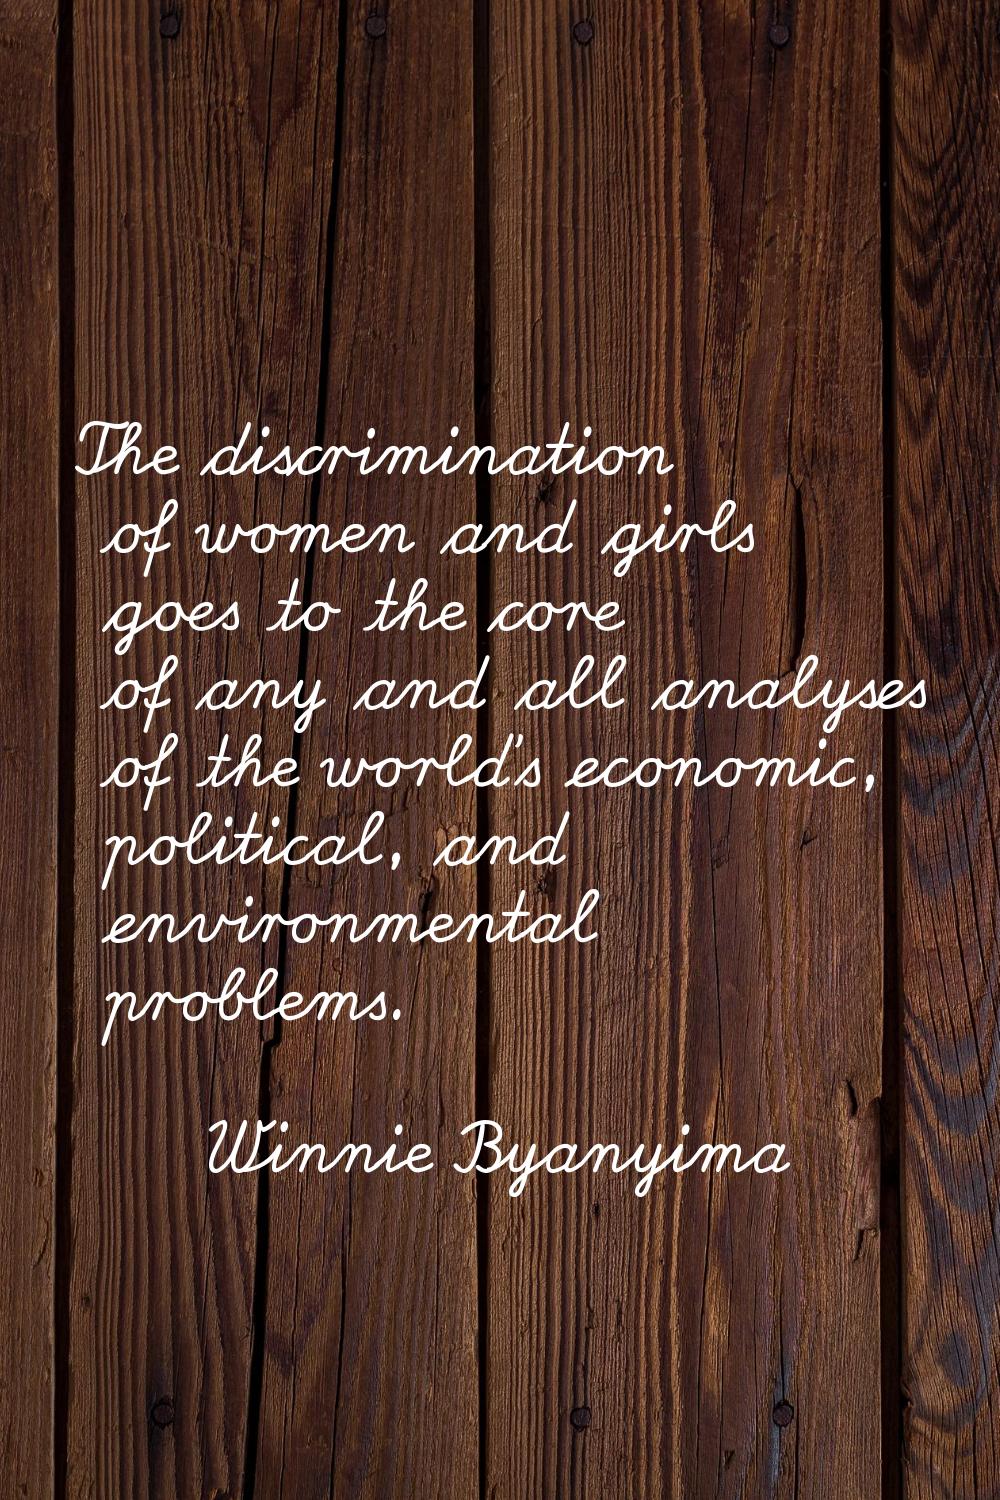 The discrimination of women and girls goes to the core of any and all analyses of the world's econo